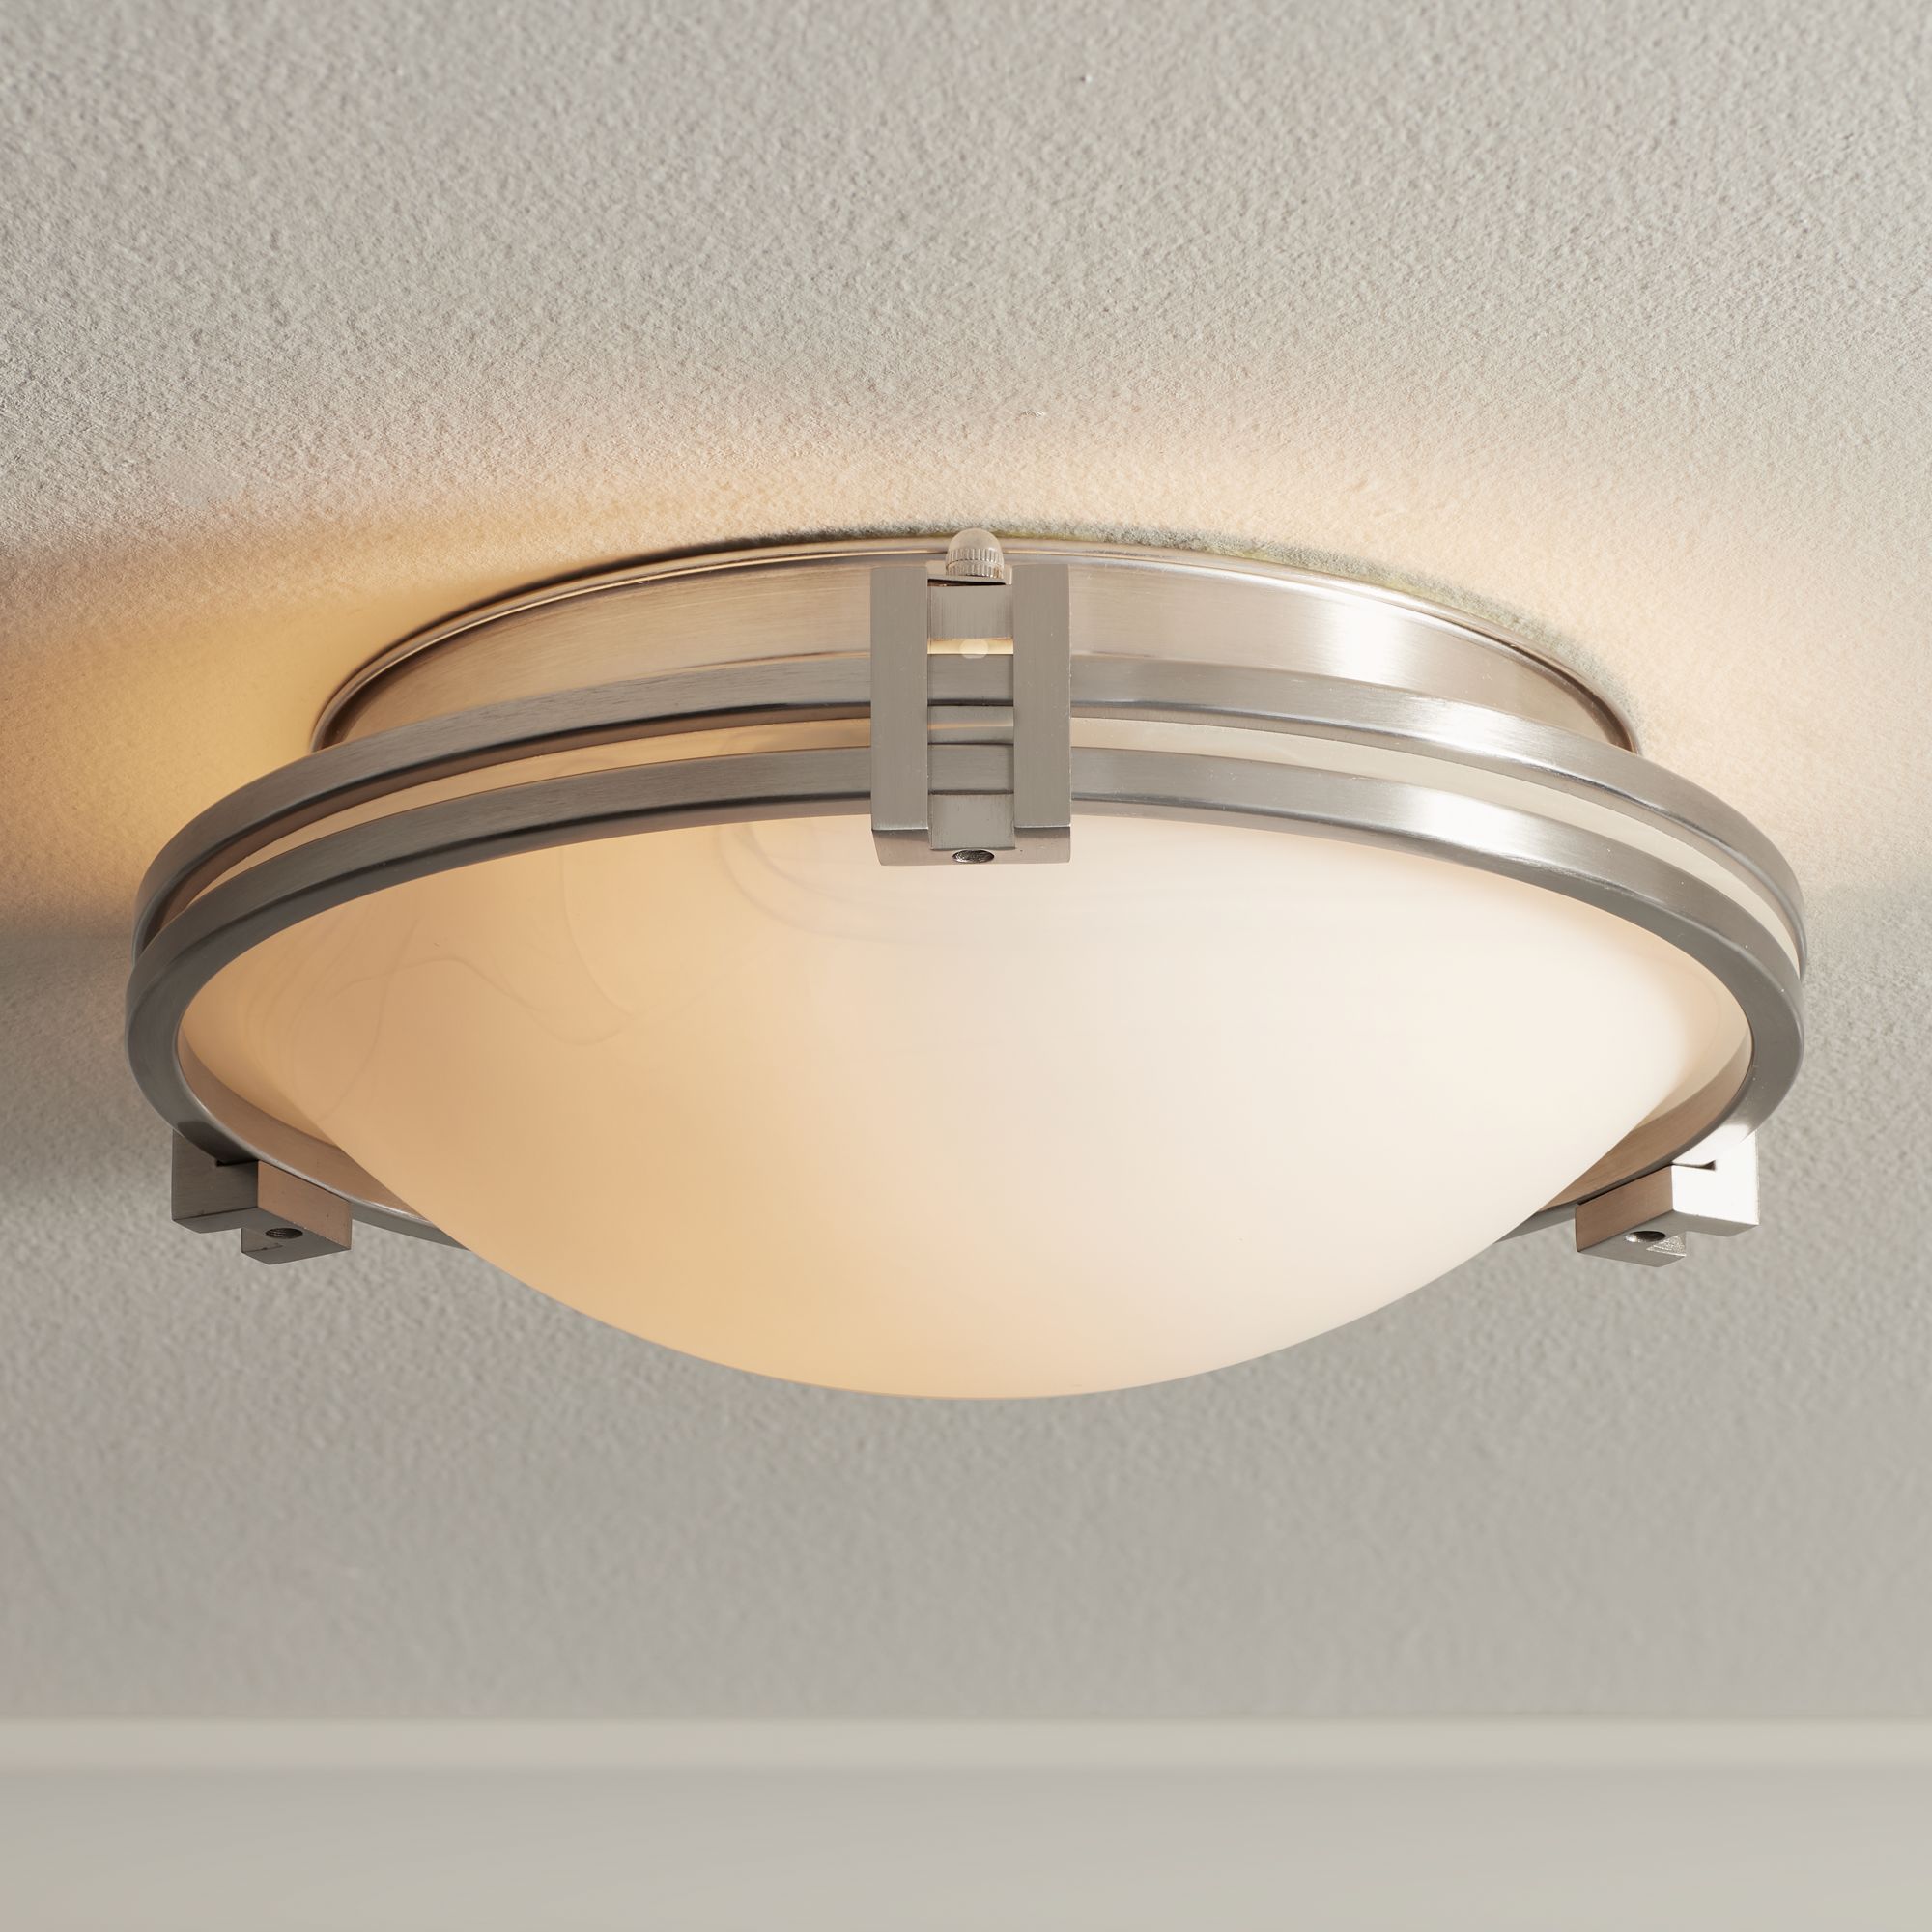 close to ceiling light fittings